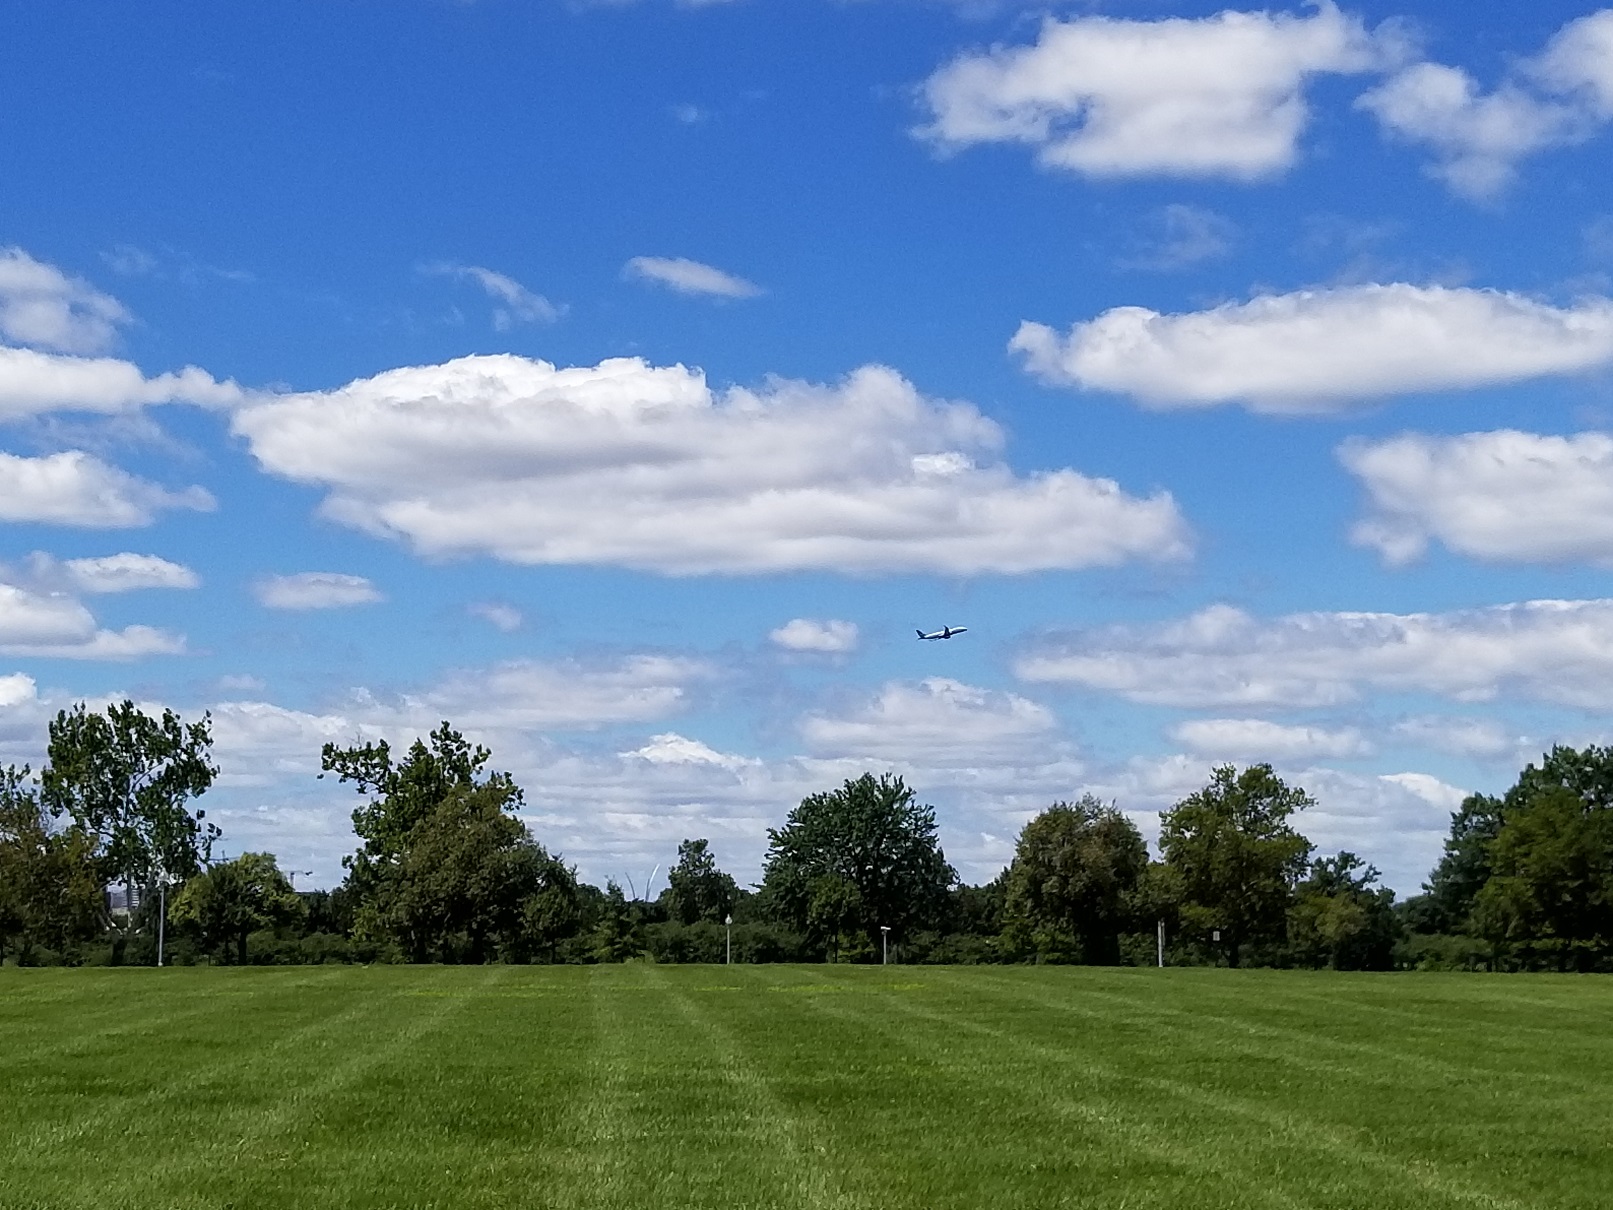 Across-the-NWC-lawn-Plane-AirForceMemorial